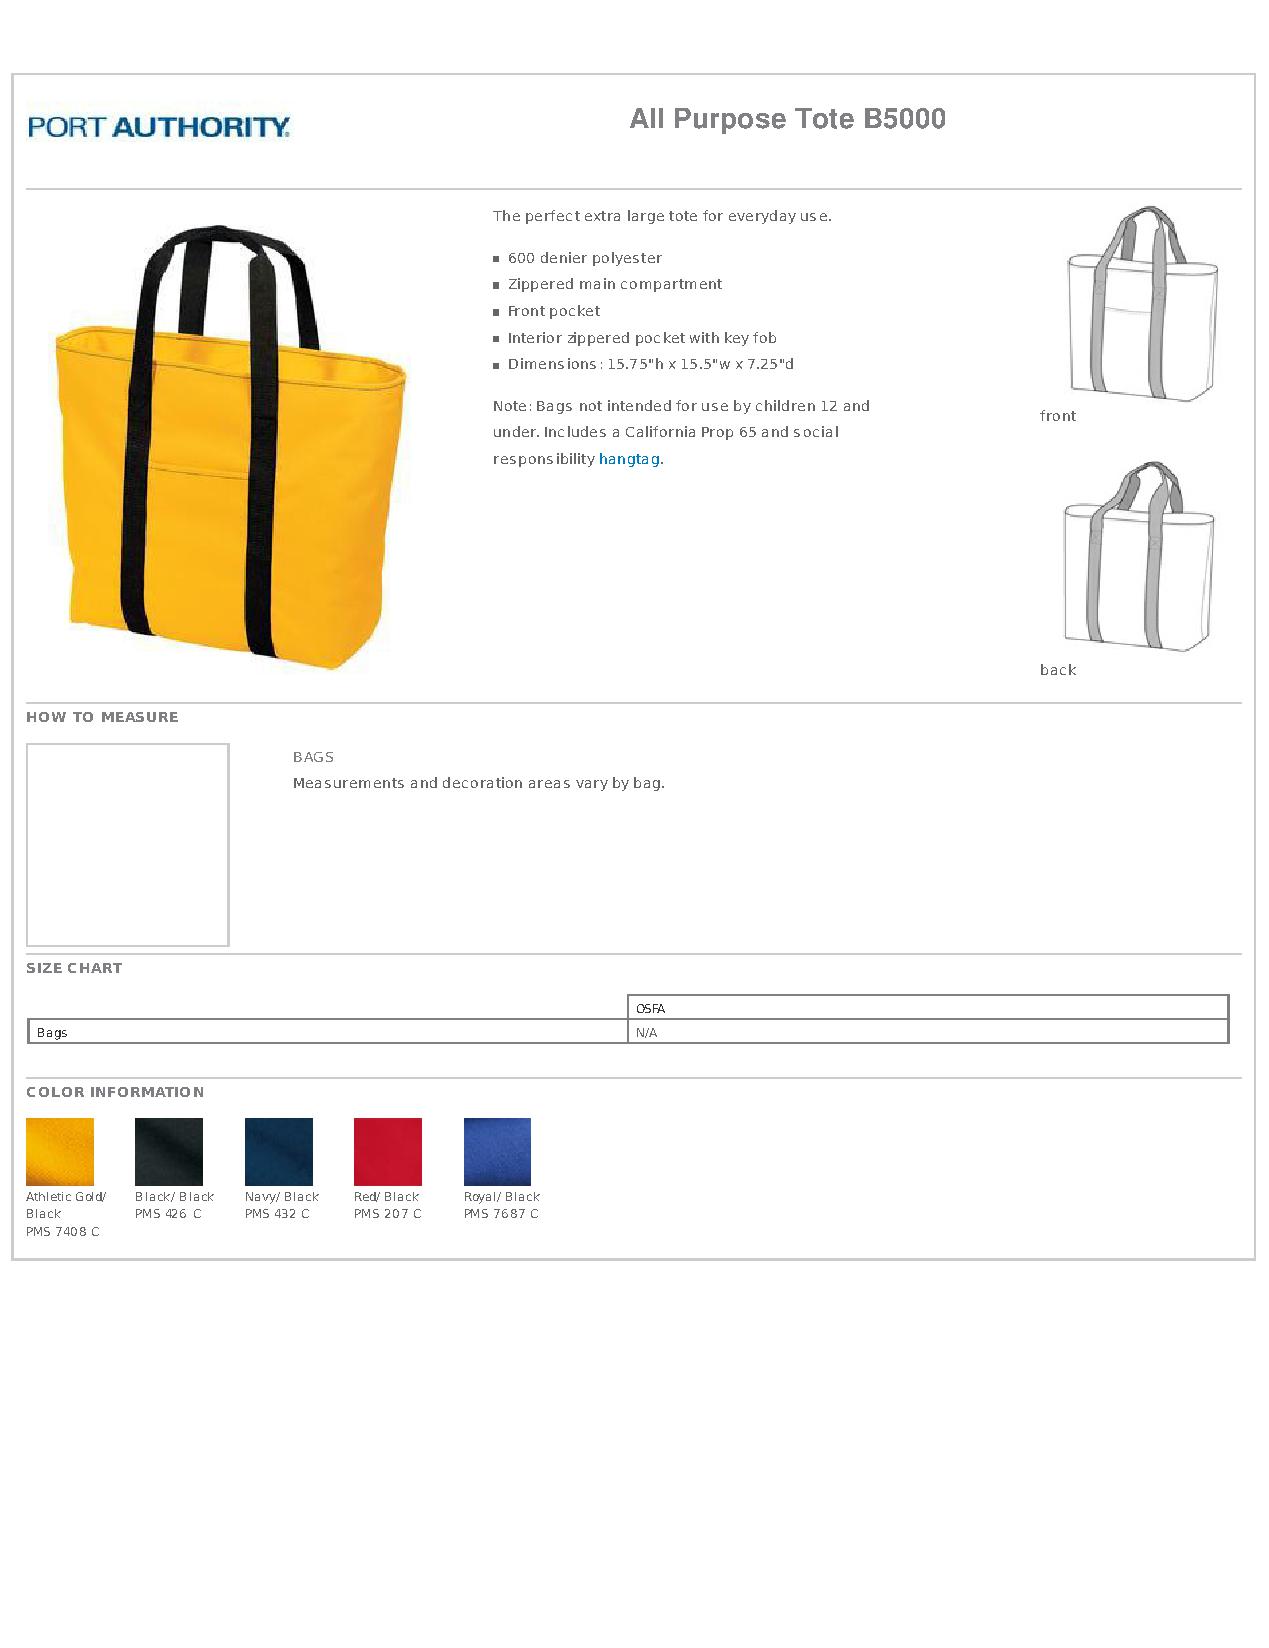 Port Authority Improved All Purpose Tote B5000